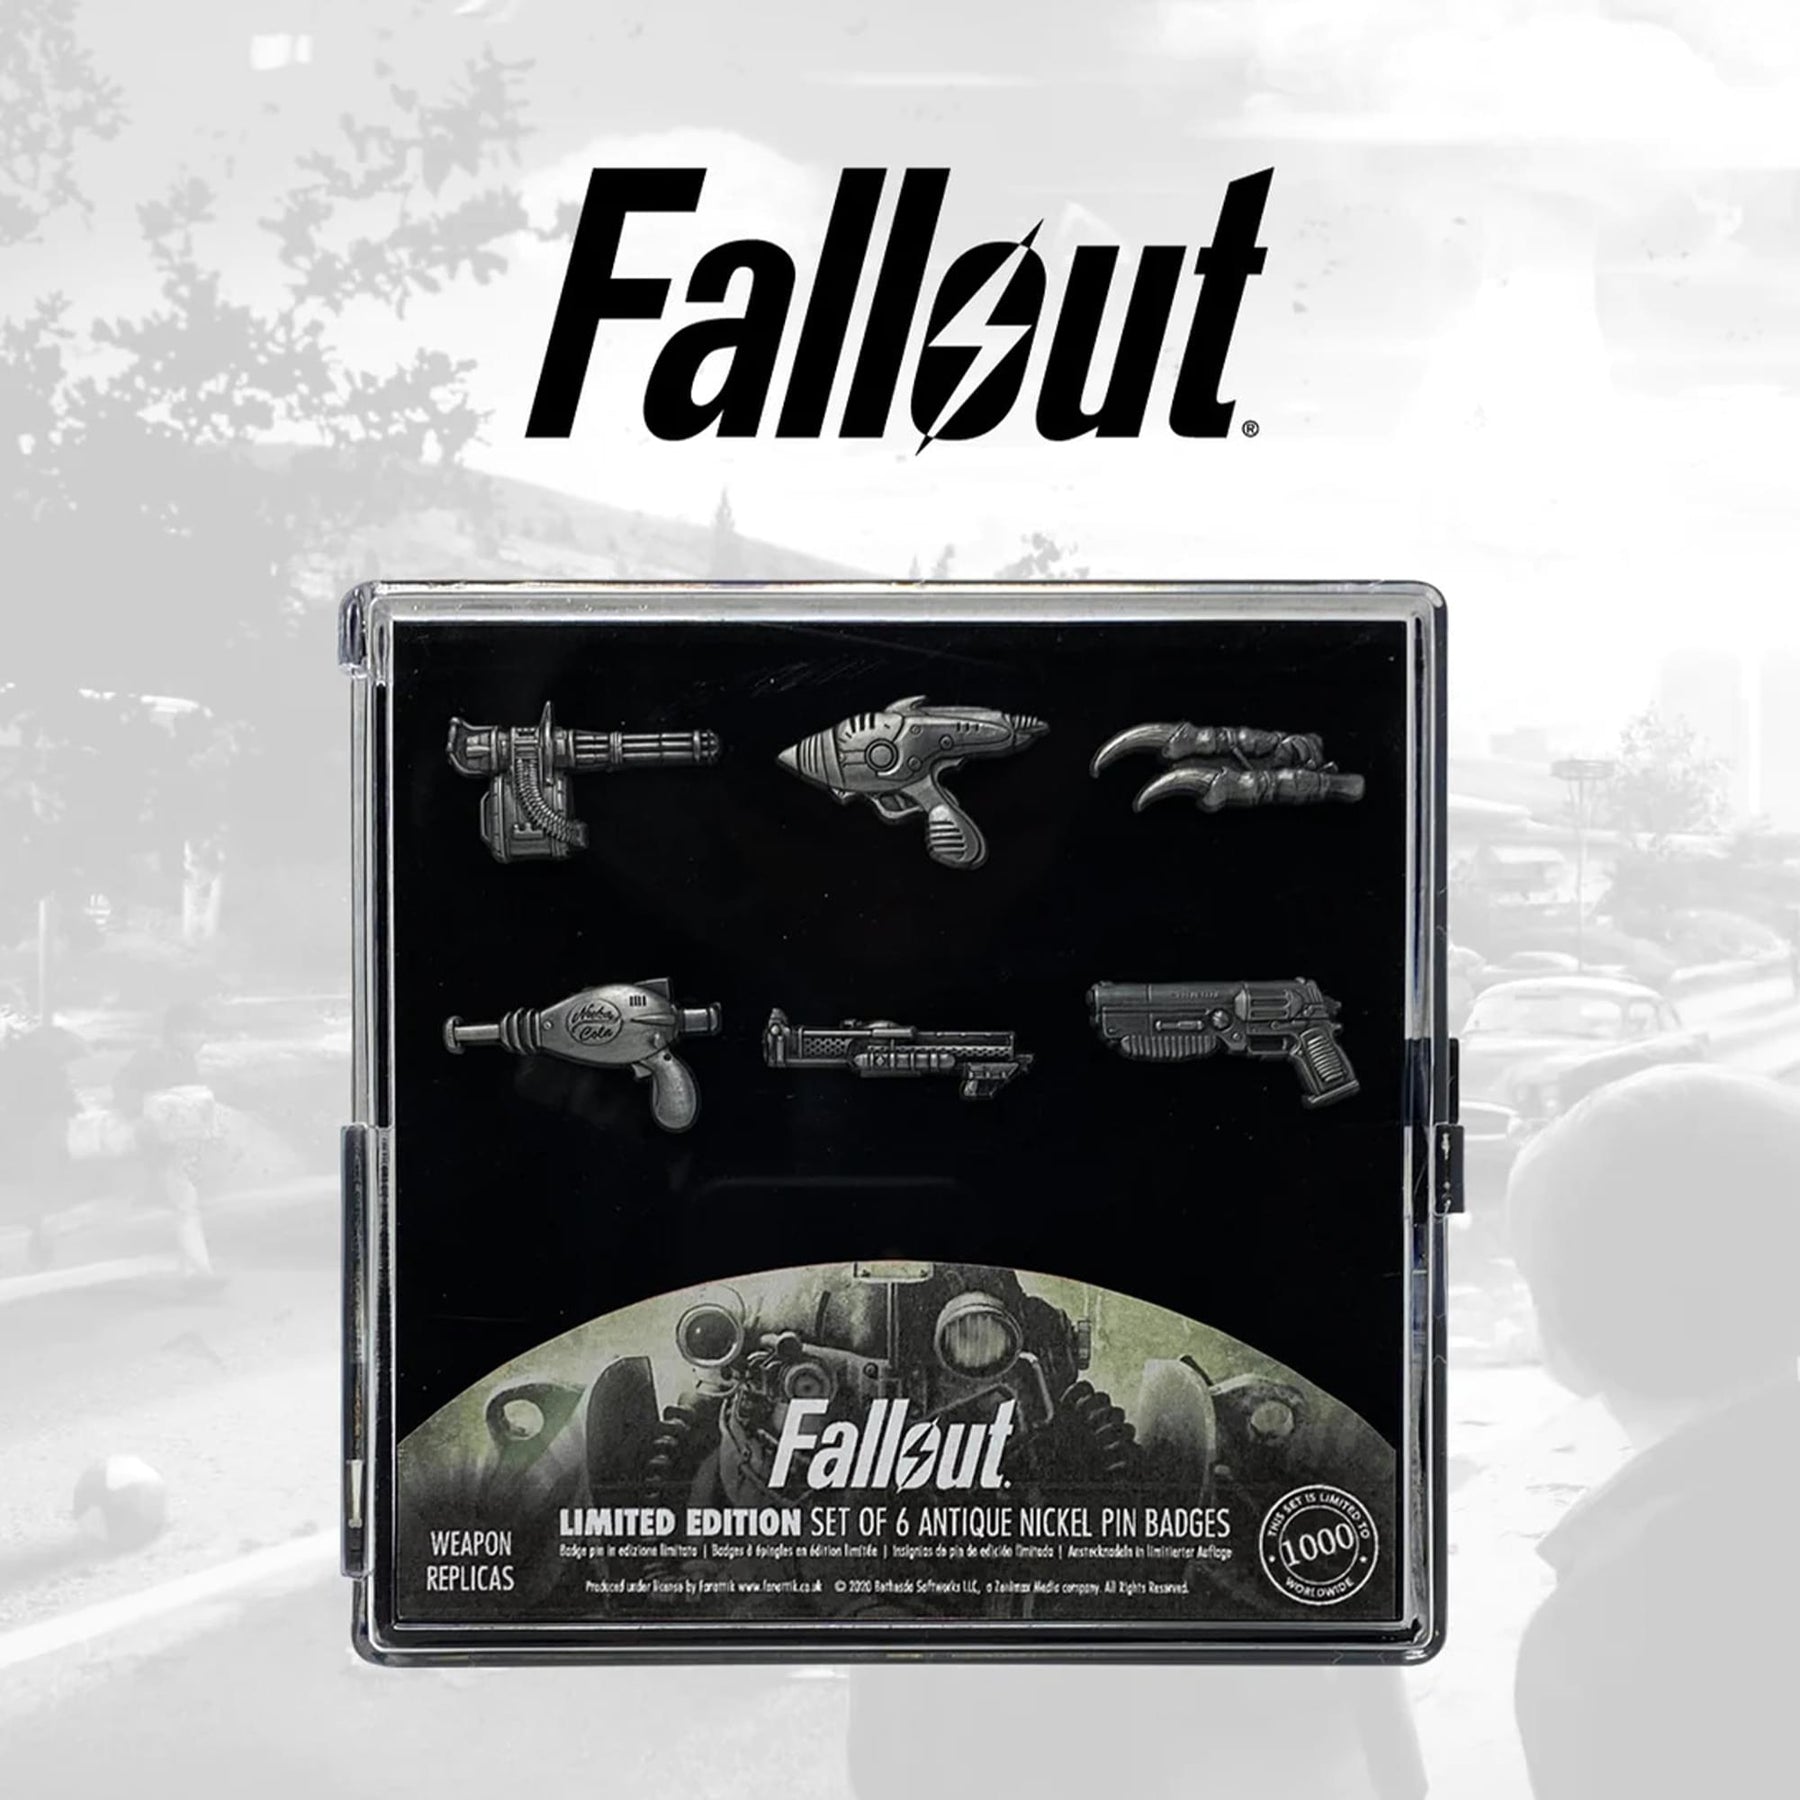 Fallout Limited Edition Weapons Pin Badge Set of 6